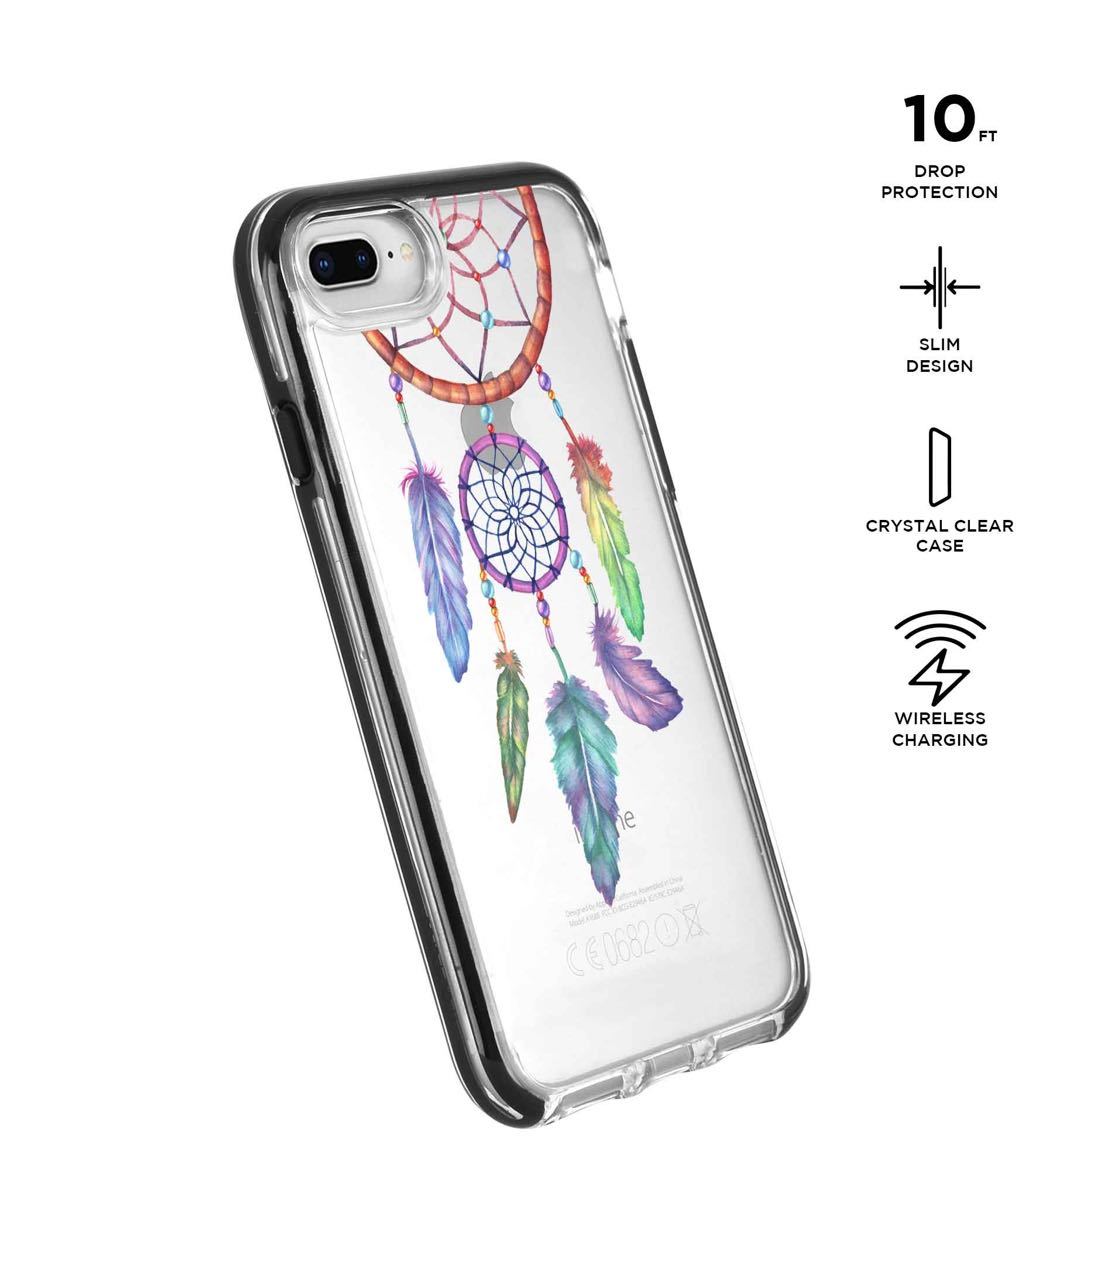 Dream Catcher Feathers - Extreme Phone Case for iPhone 8 Plus